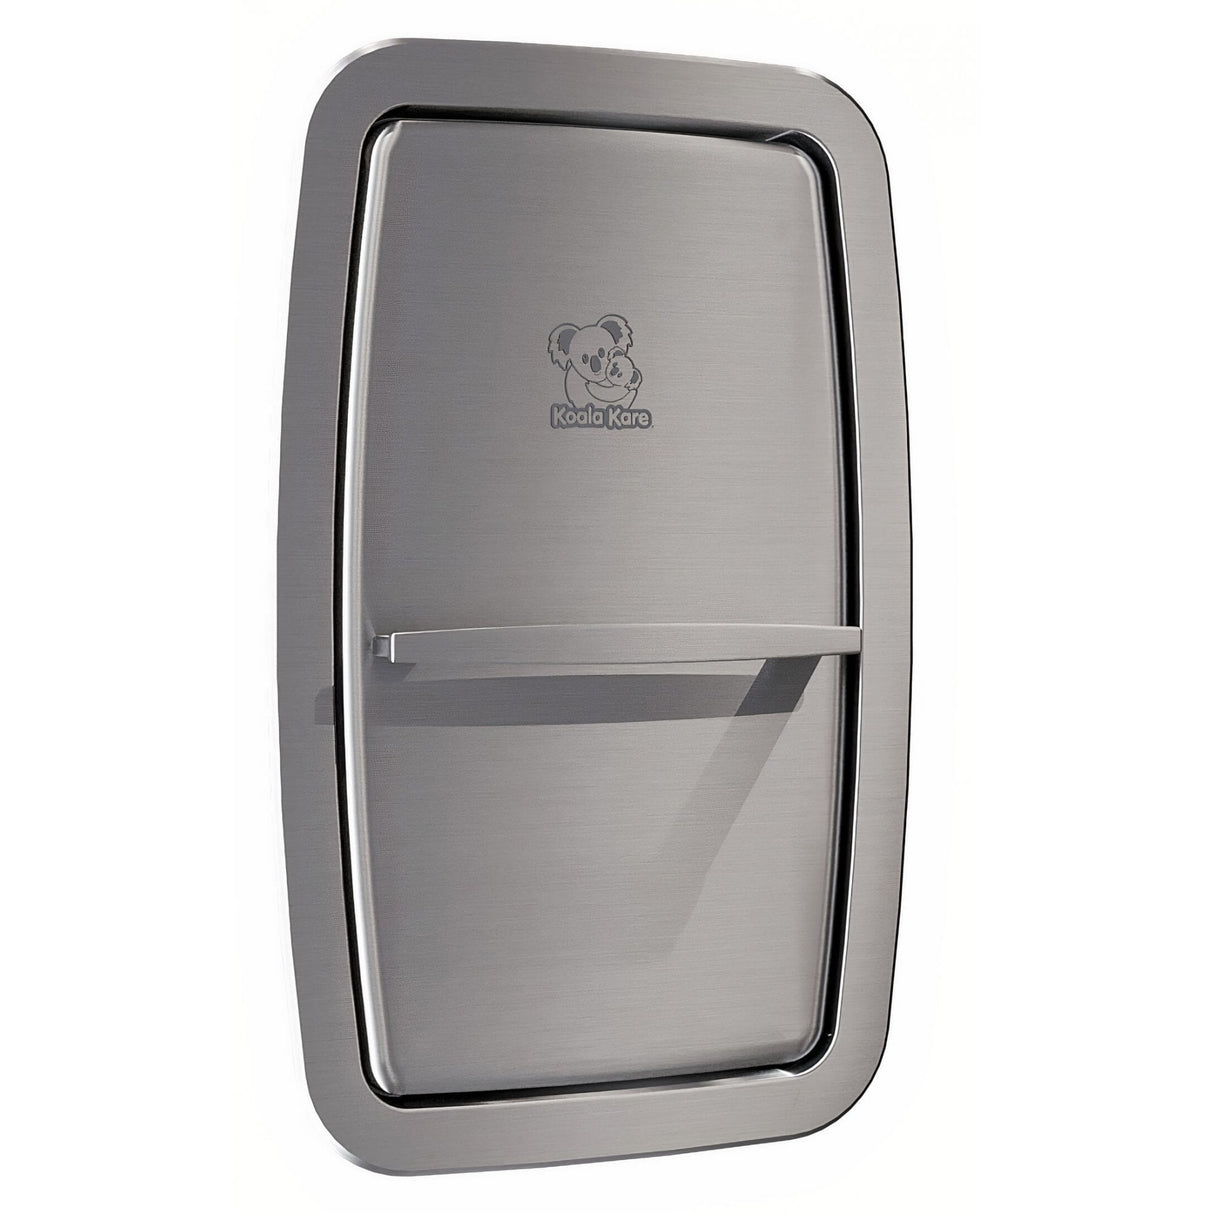 KB311-SSRE-EN Vertical Stainless Steel Recessed-Mounted Baby Changing Station